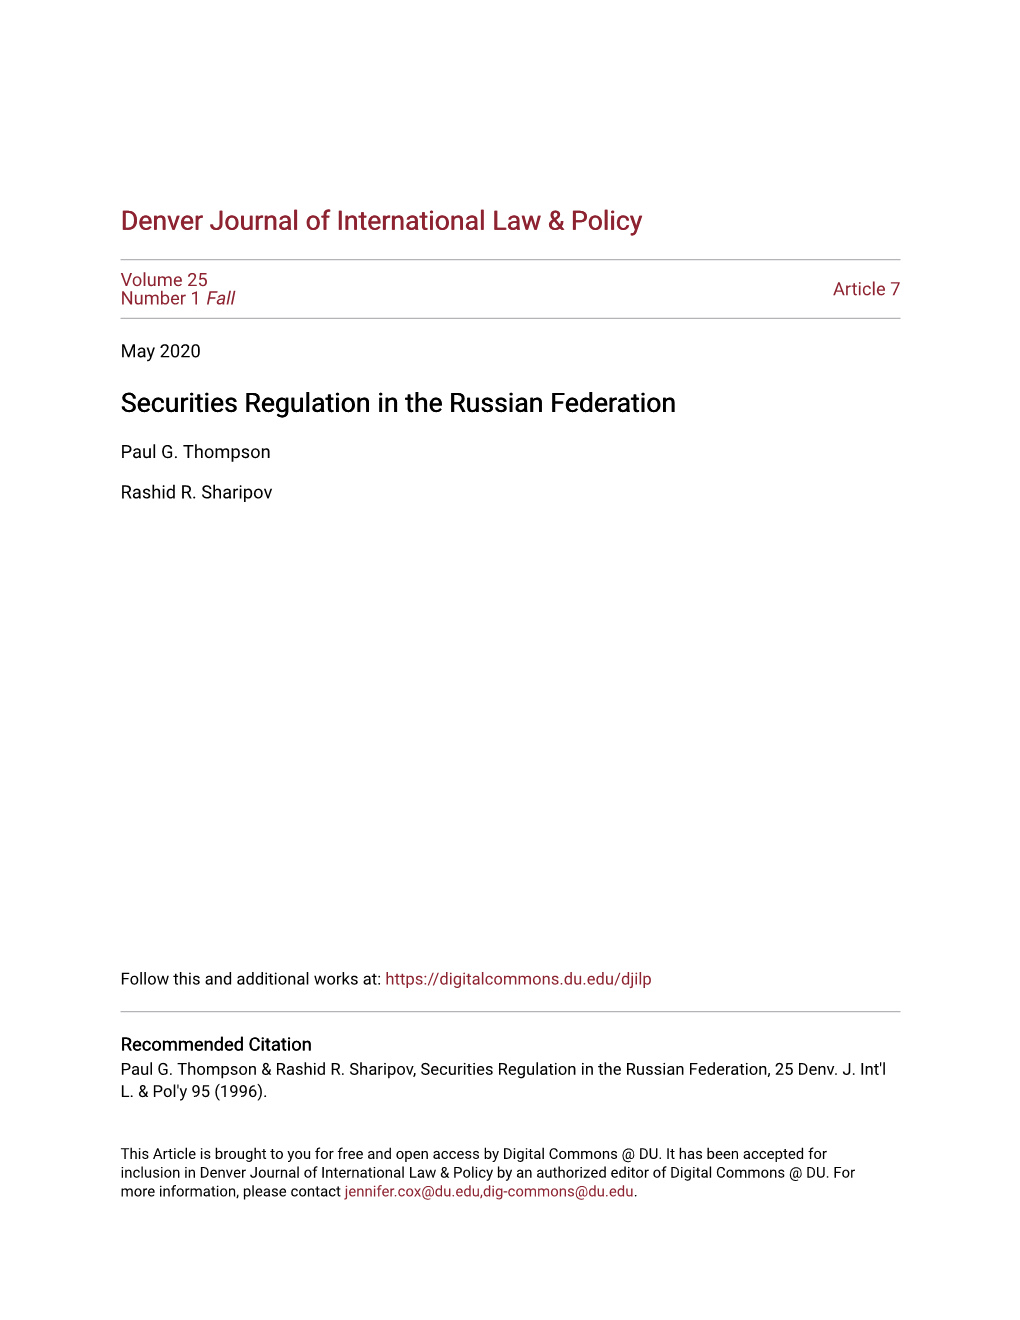 Securities Regulation in the Russian Federation